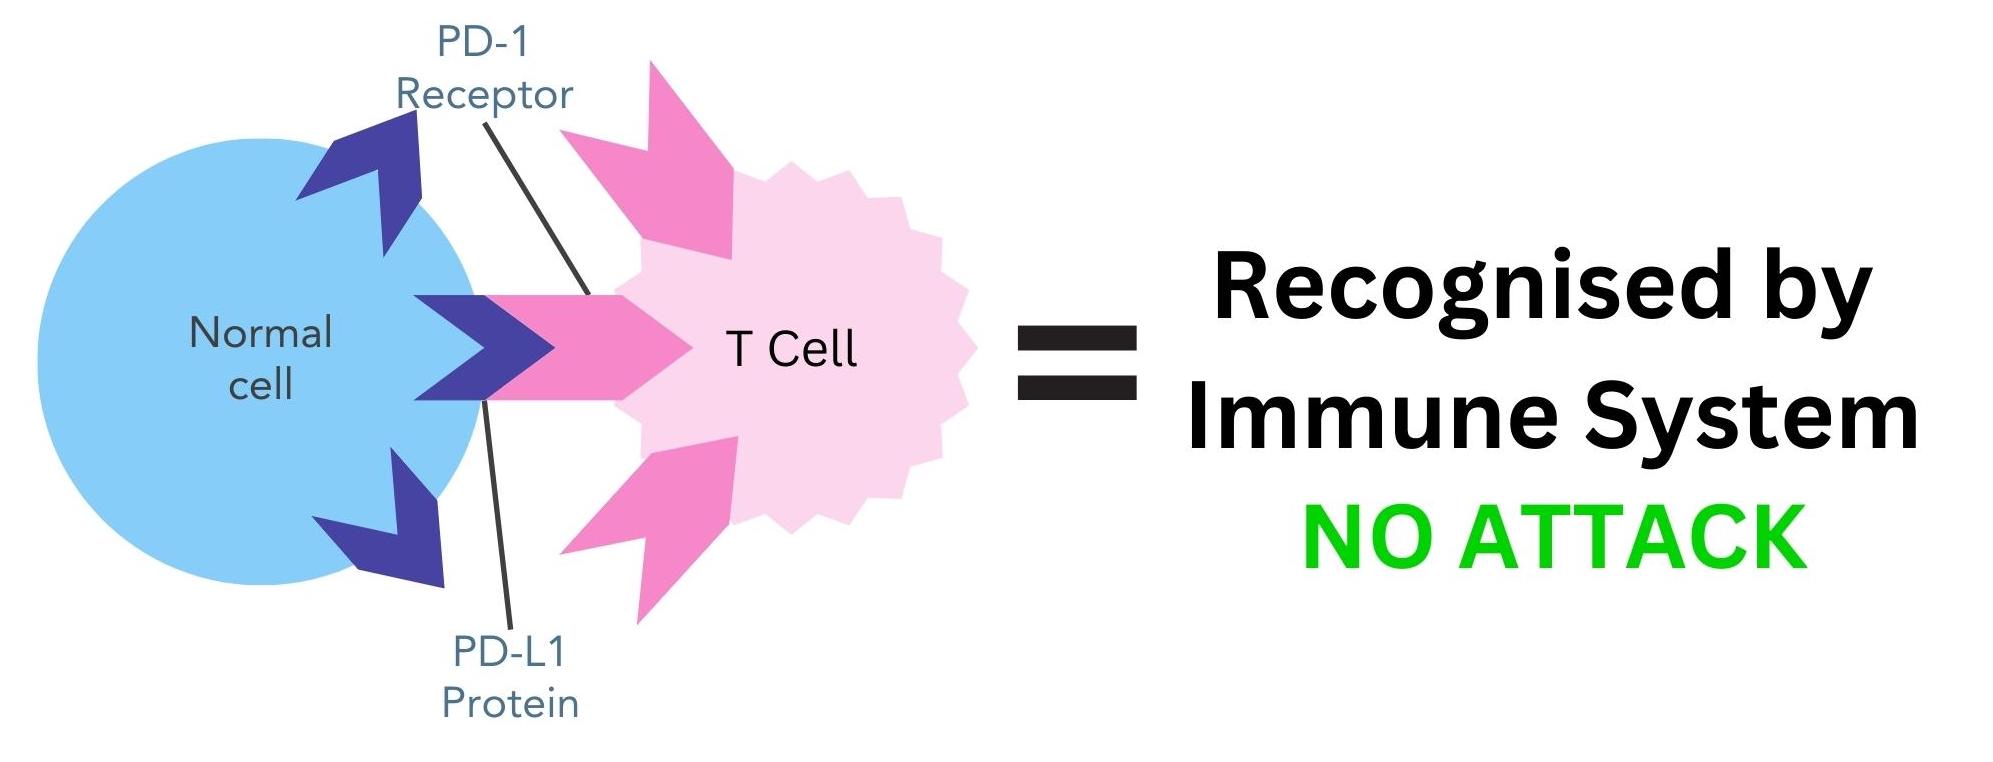 Immune system recognising normal non-cancer cells